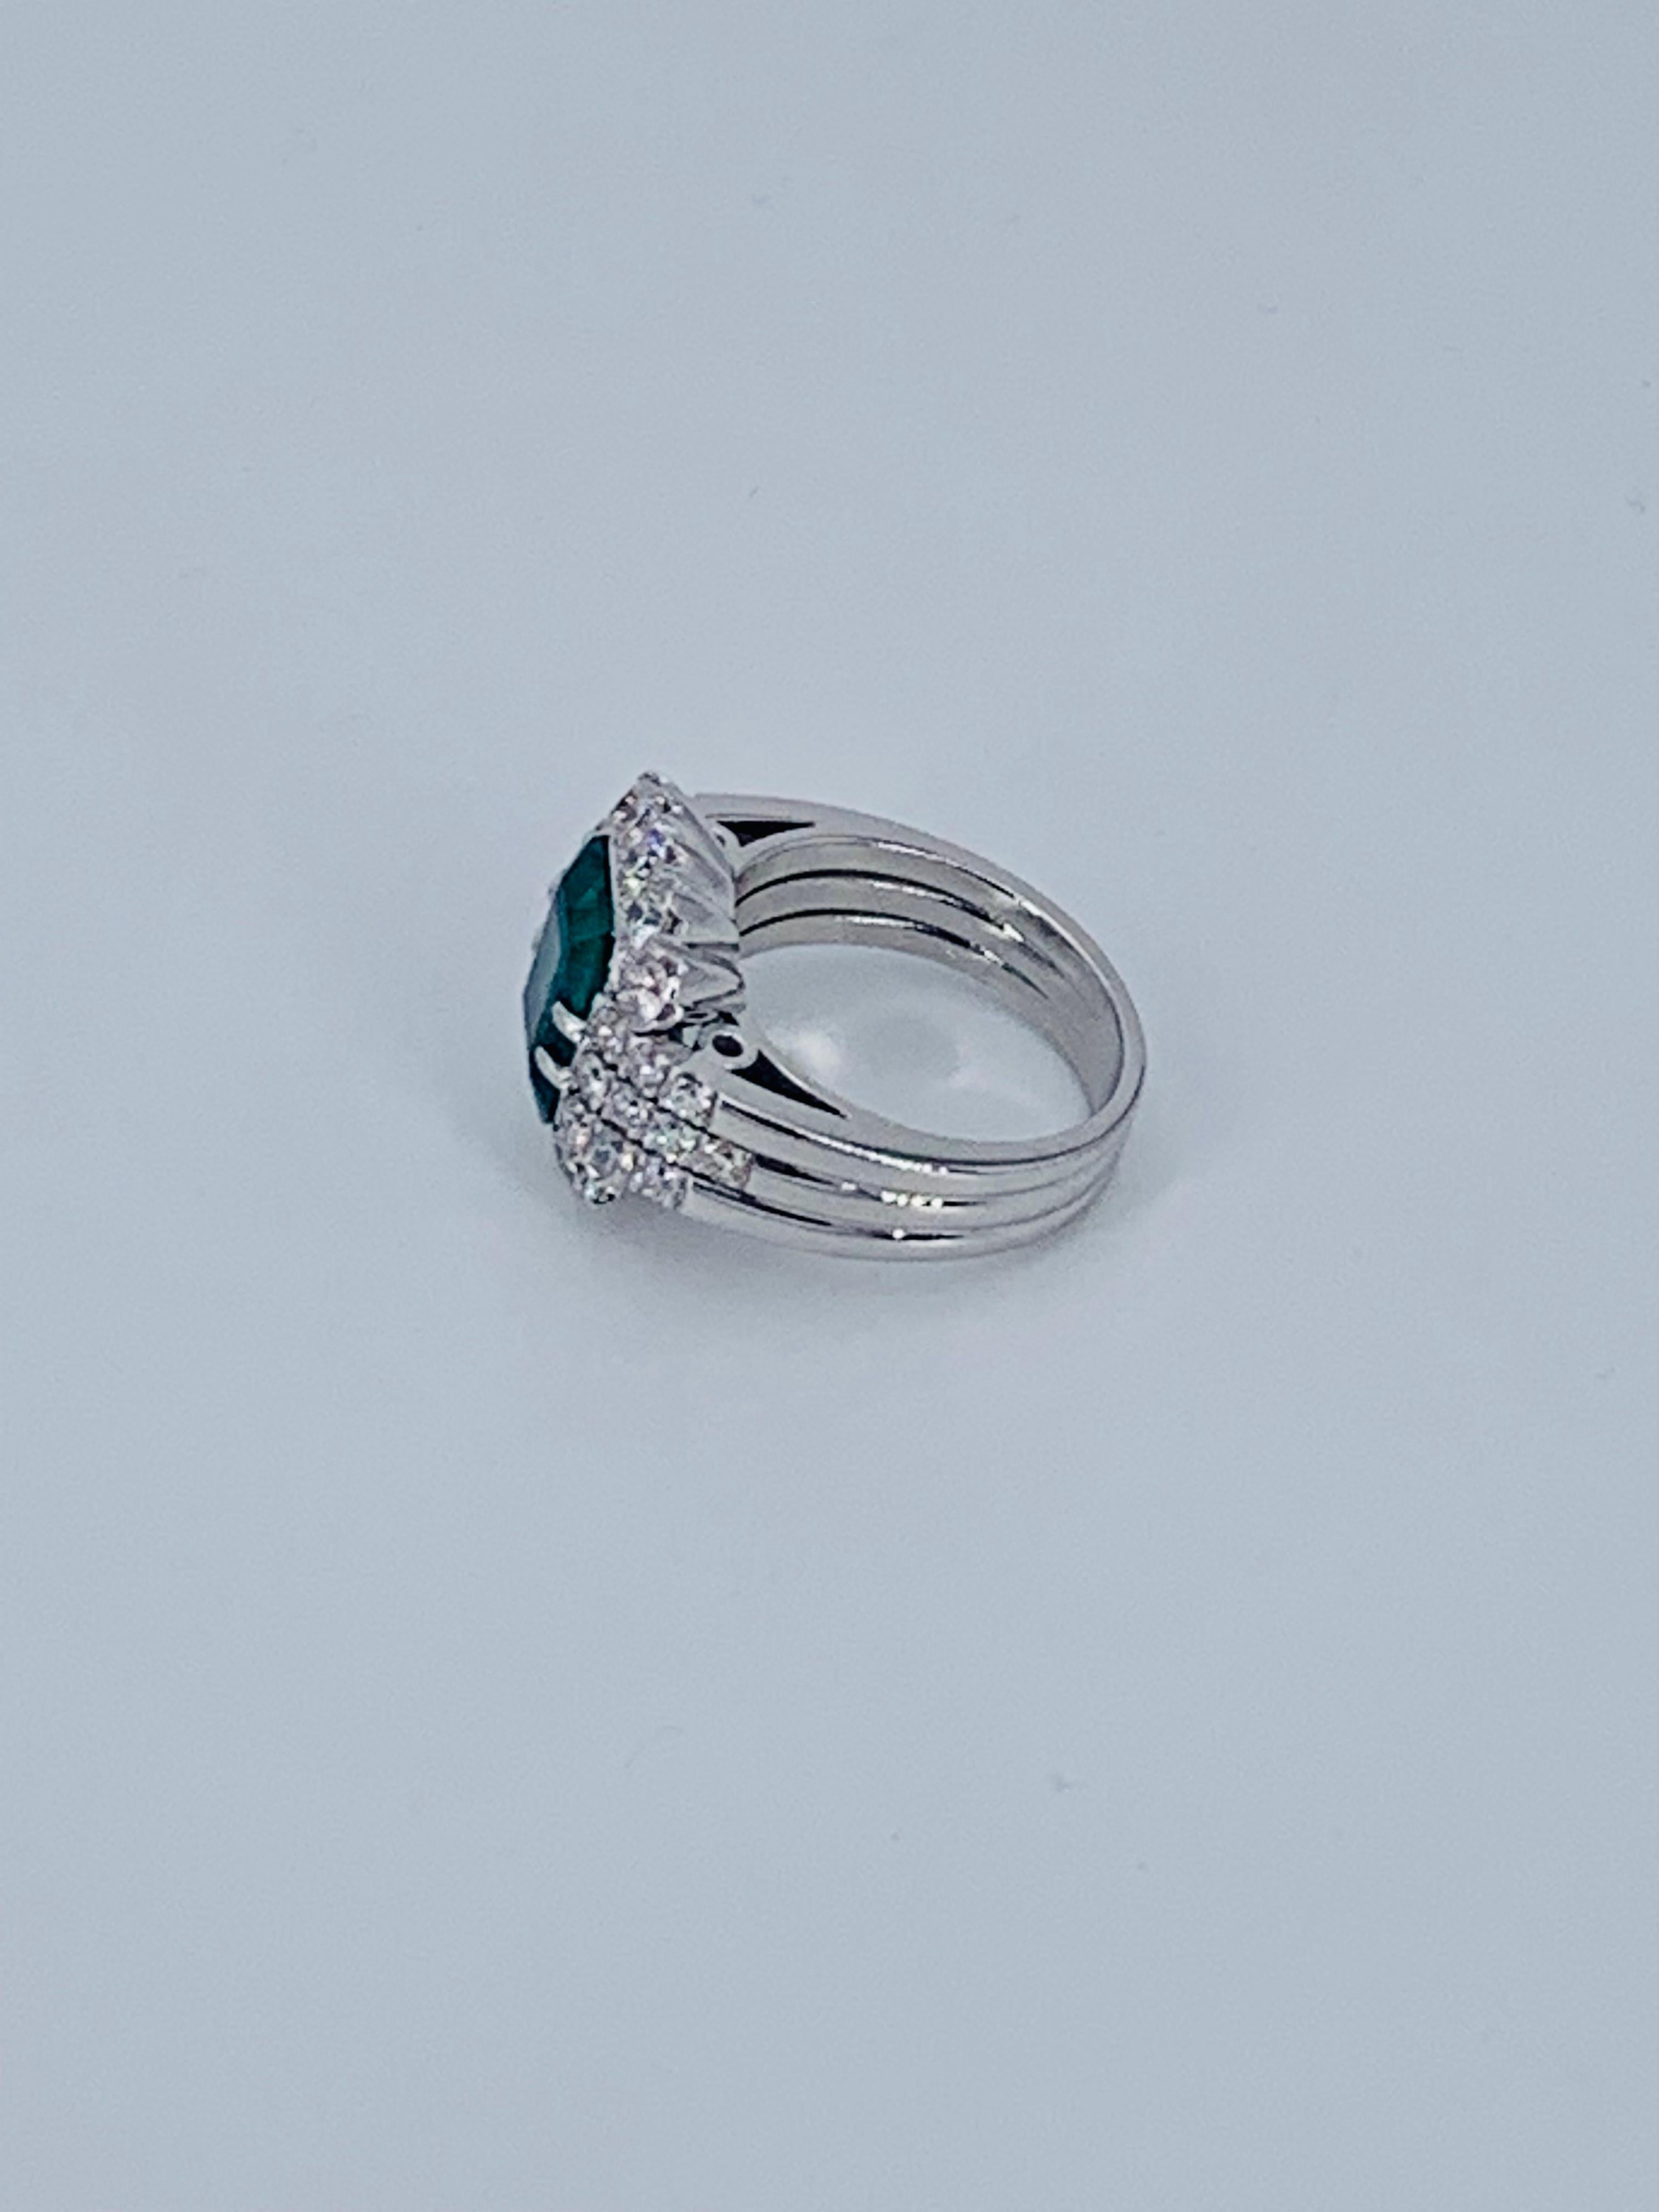 Contemporary 5.66 Carat Colombian Emerald Floral Designed Diamond Cocktail Ring For Sale